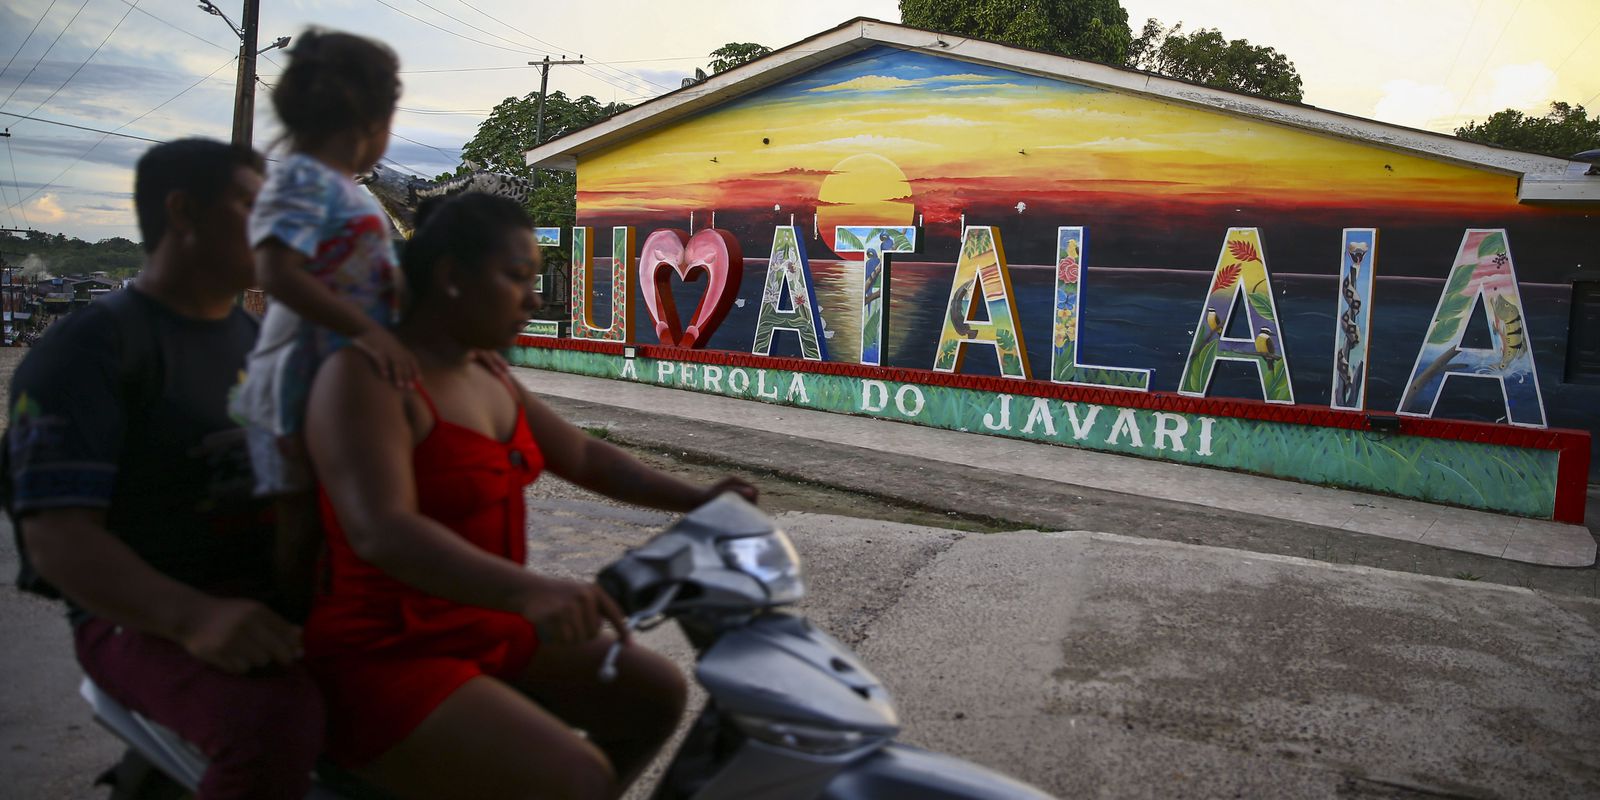 In Atalaia do Norte, the population lives with unemployment and violence